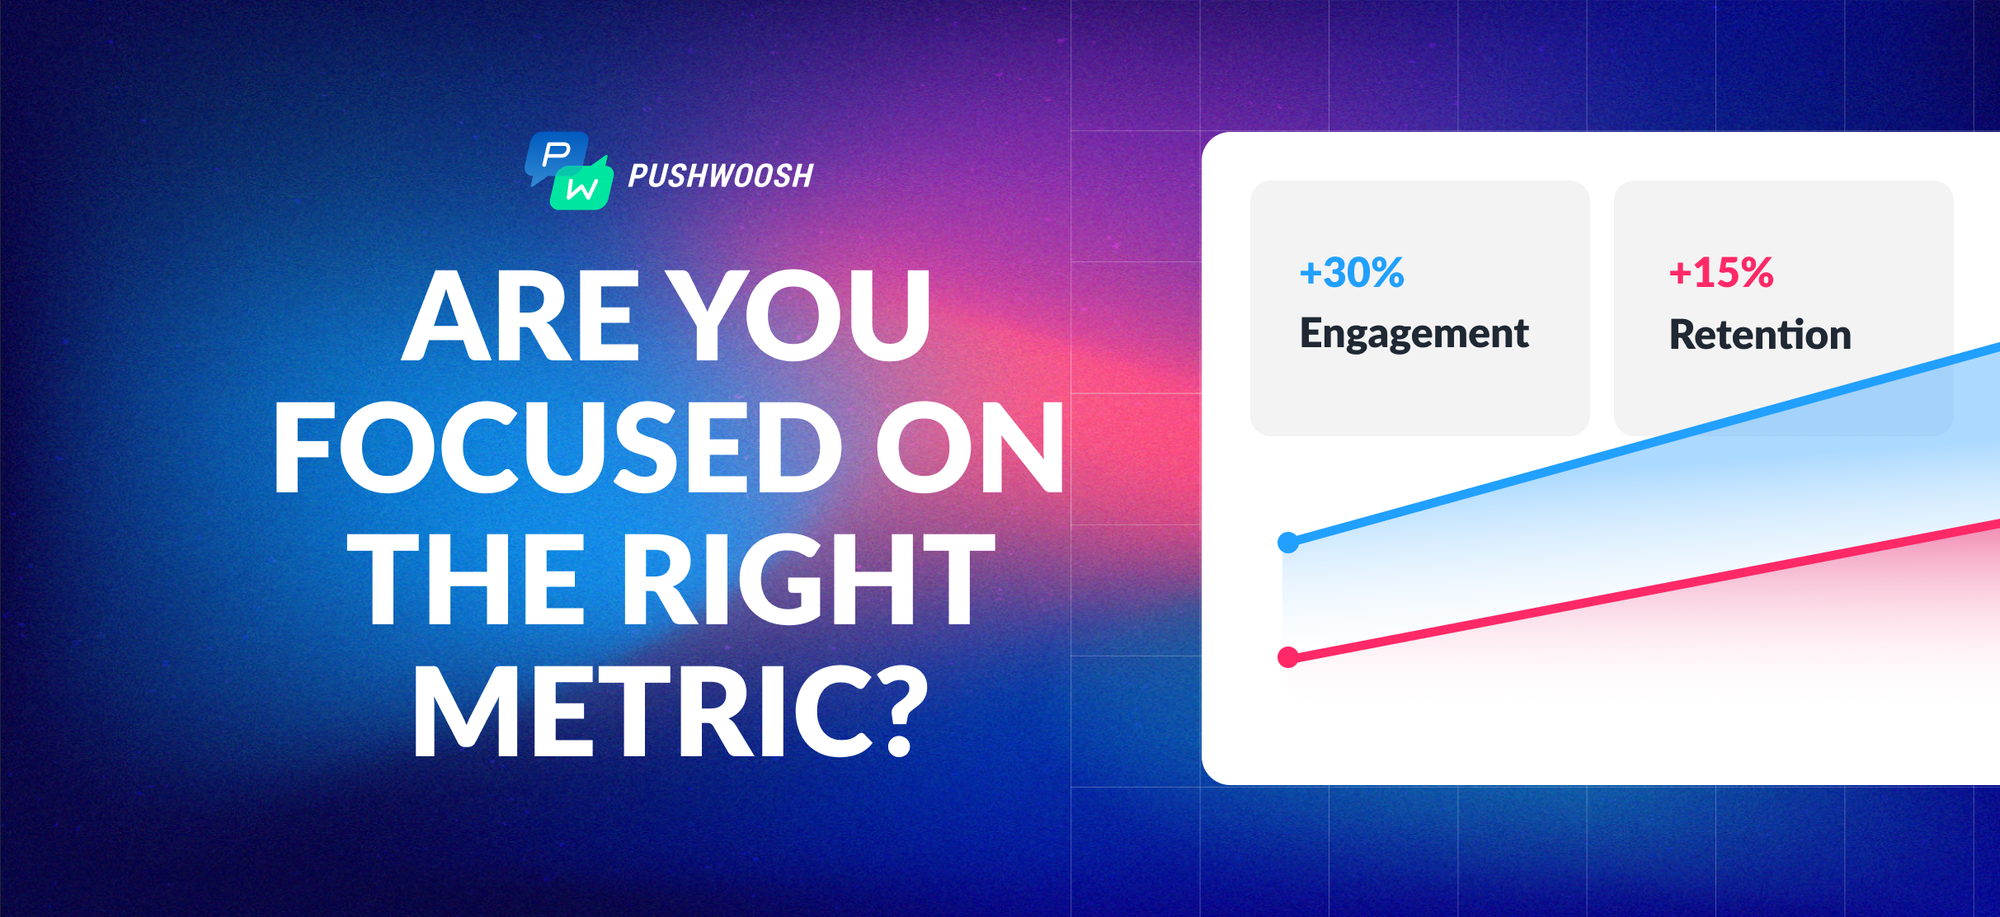 Focus on User Engagement Instead of Retention and Grow Both